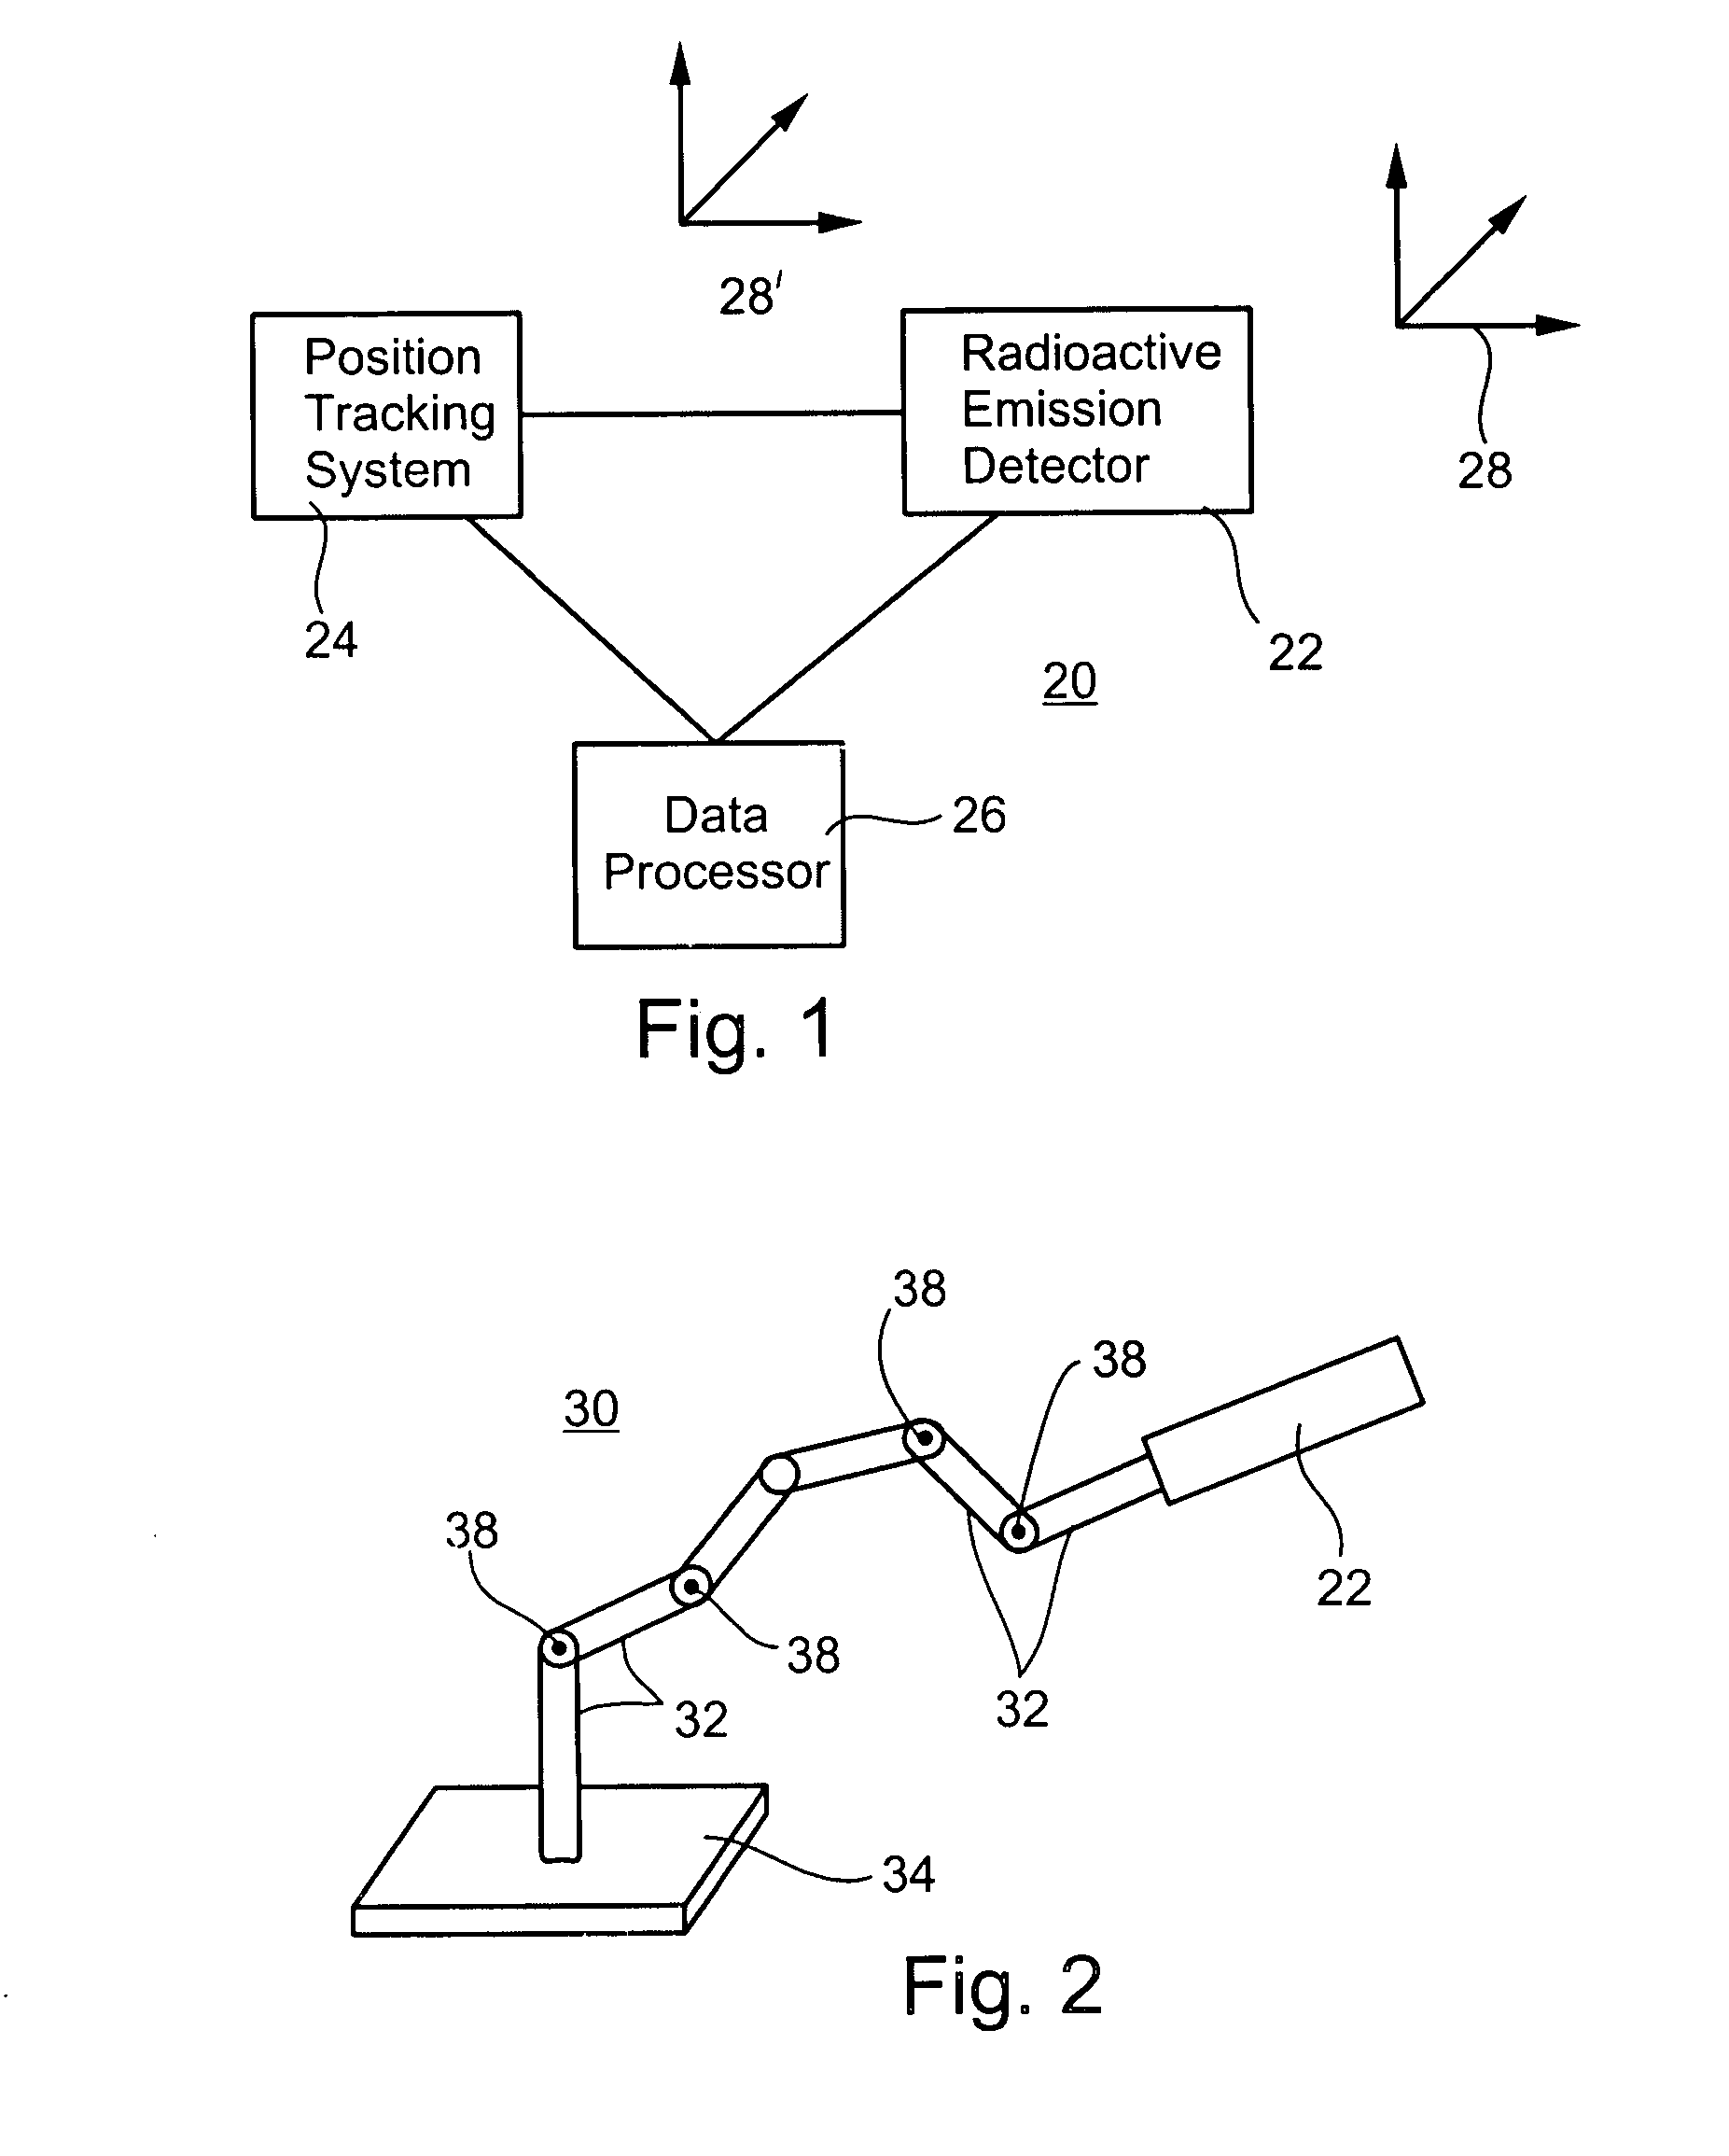 Radioactive emission detector equipped with a position tracking system